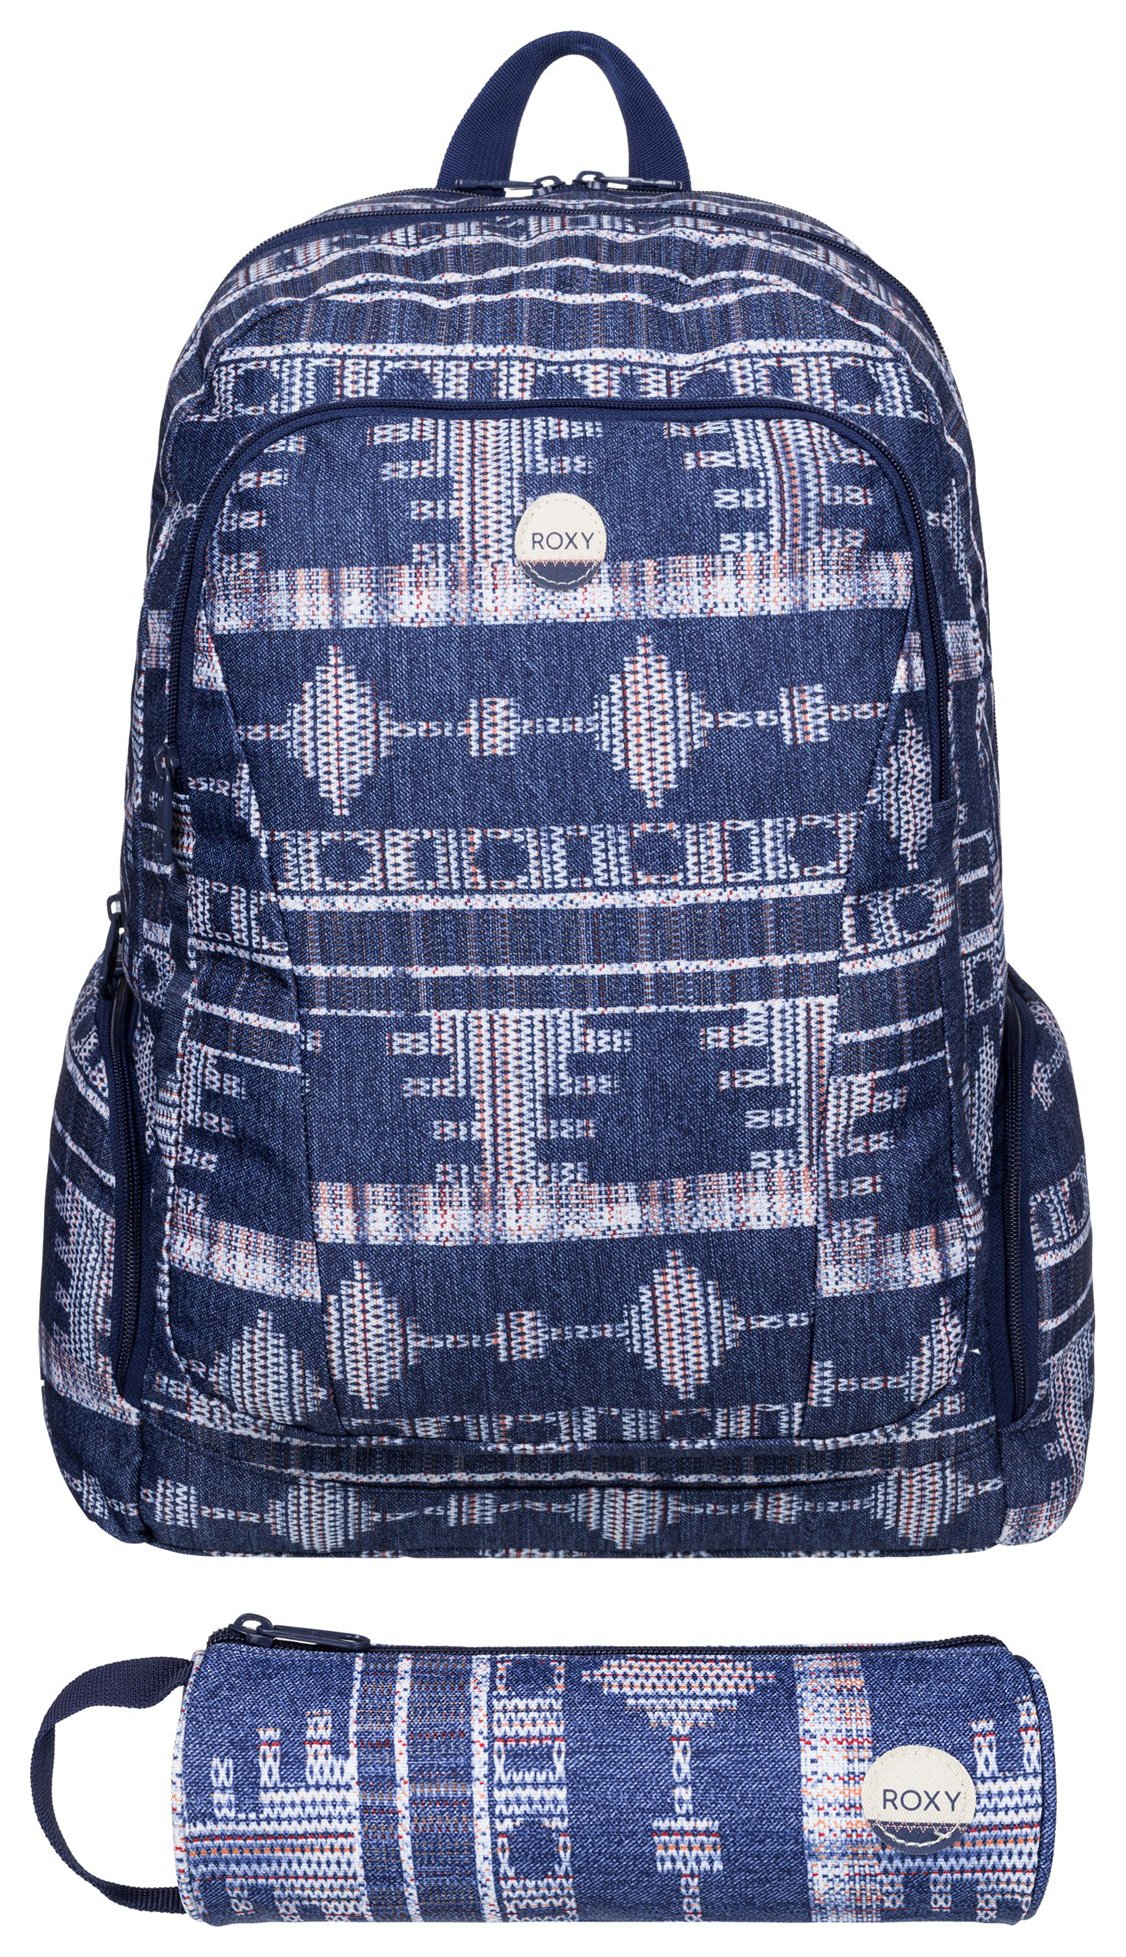 Roxy Blue Tribal Backpack with Matching Pencil Case